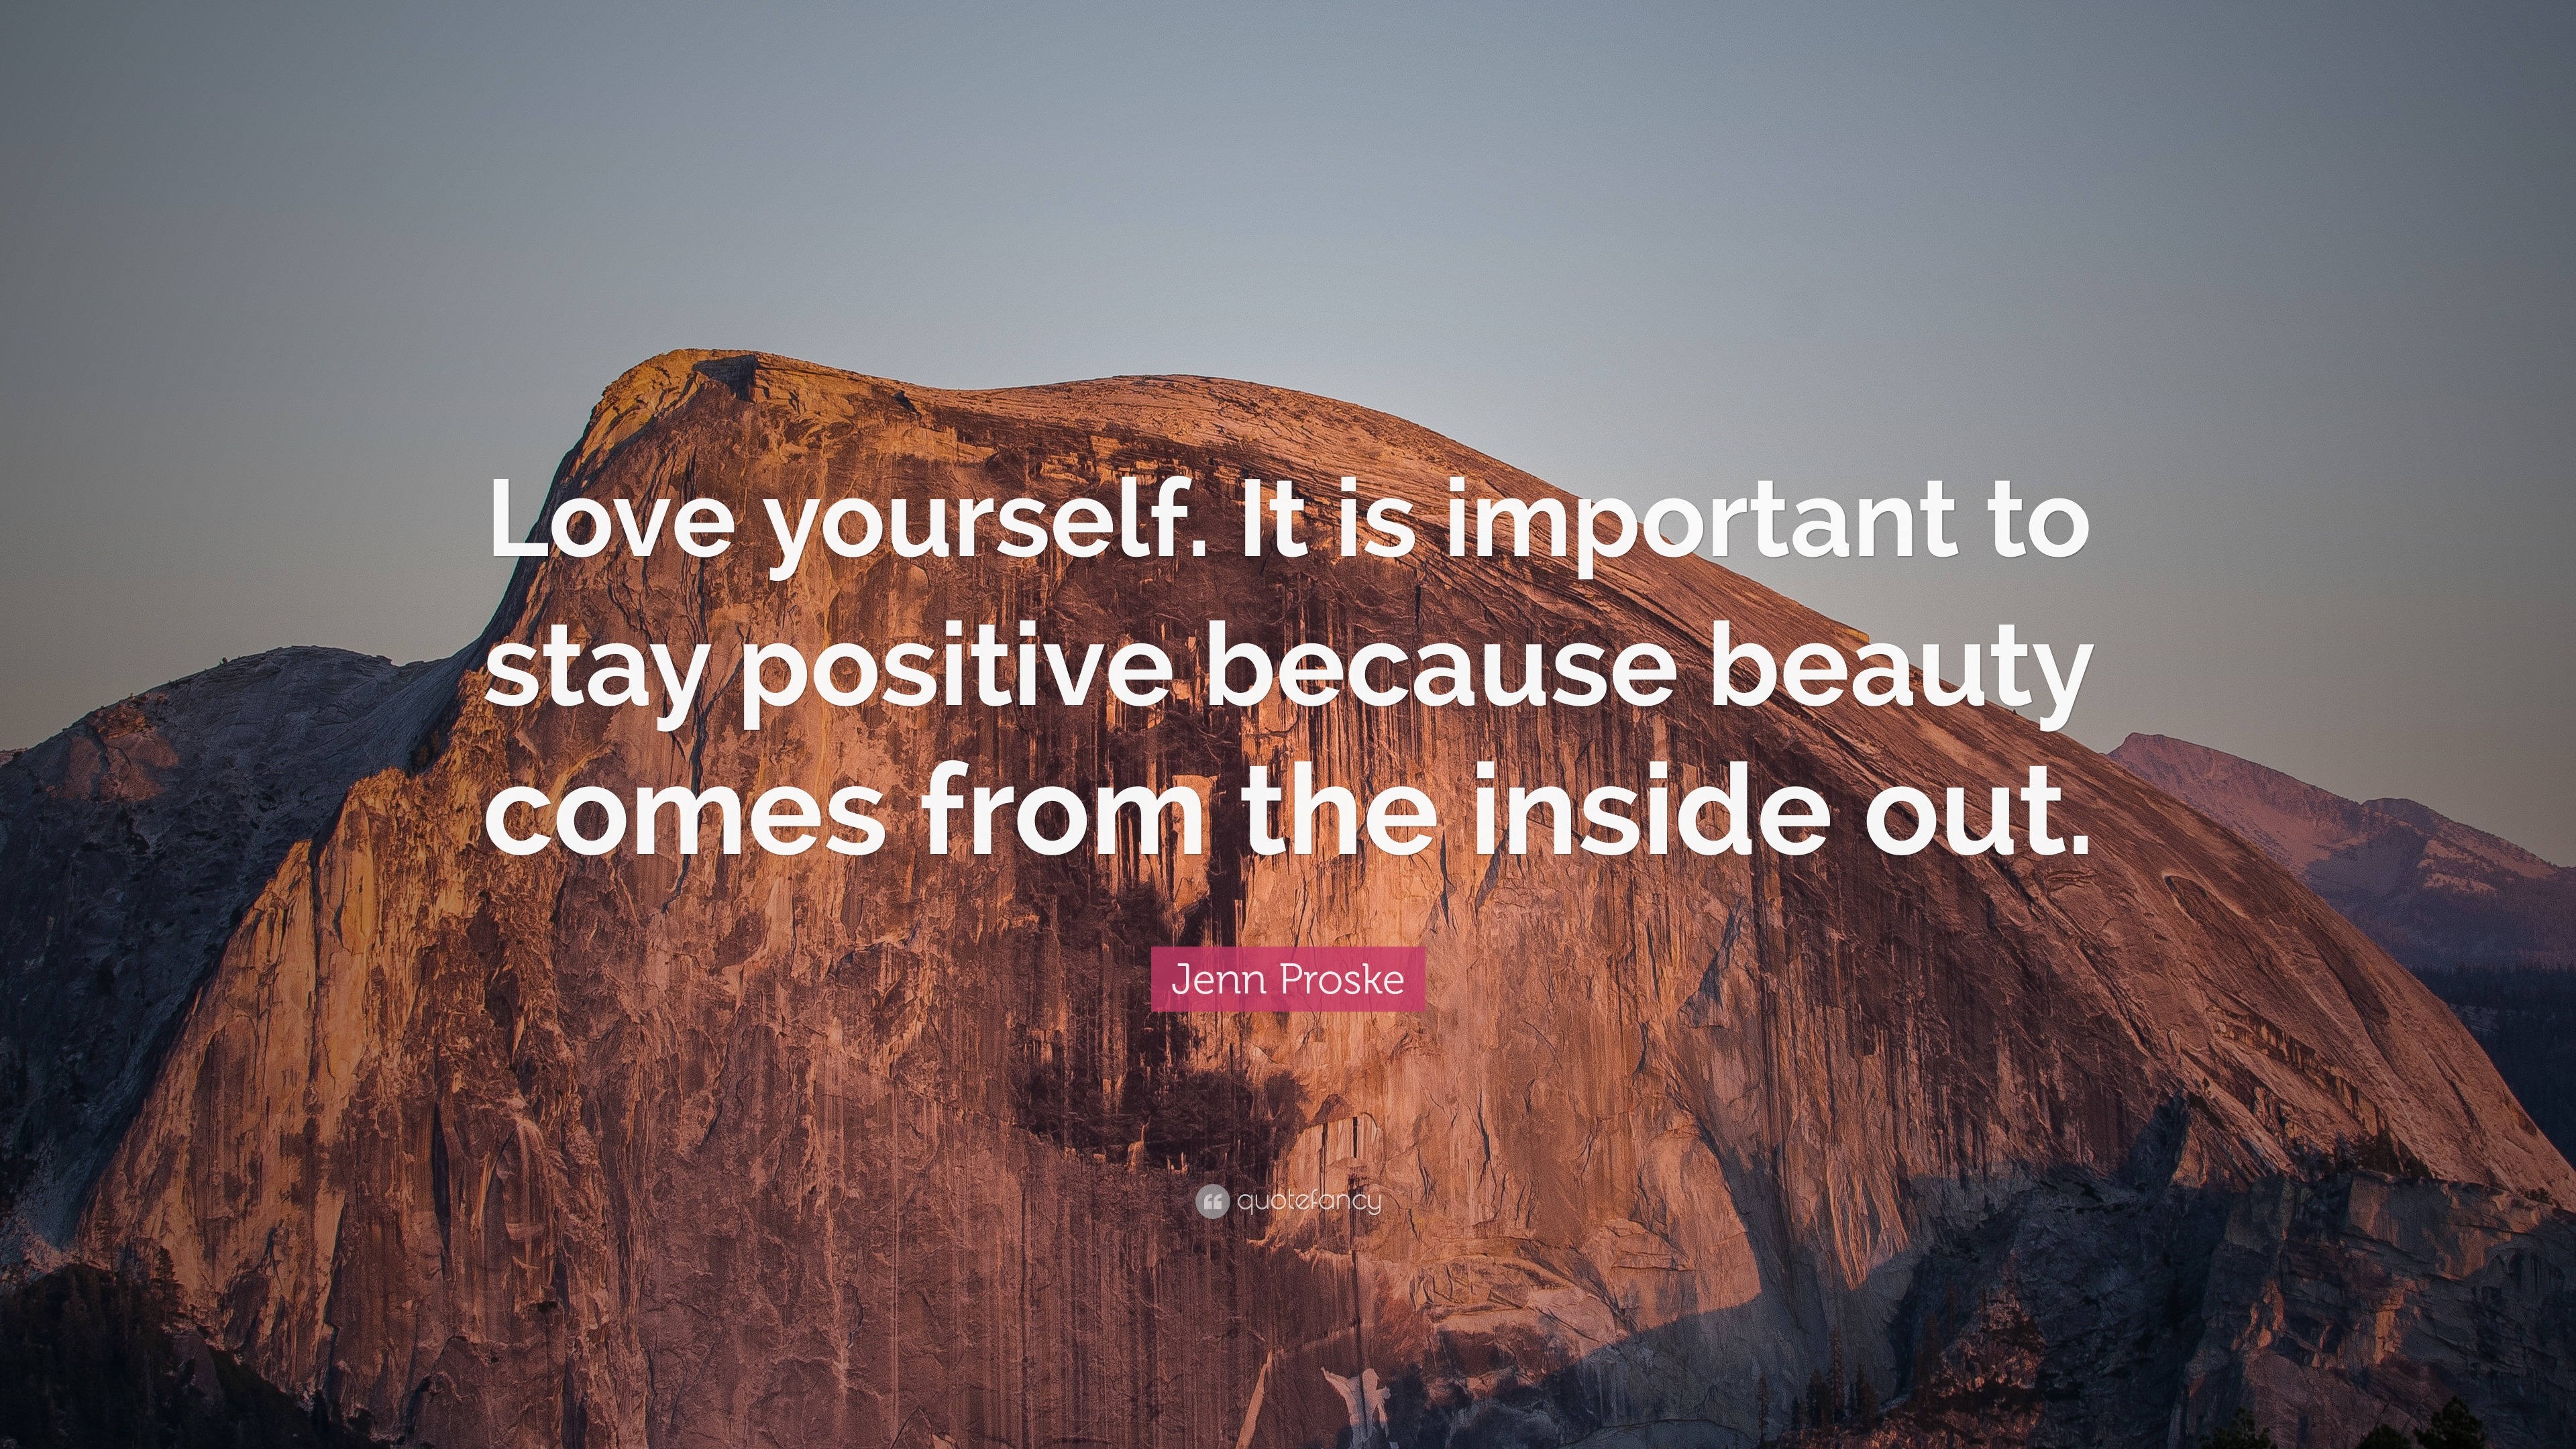 love yourself it is important to stay positive quotes